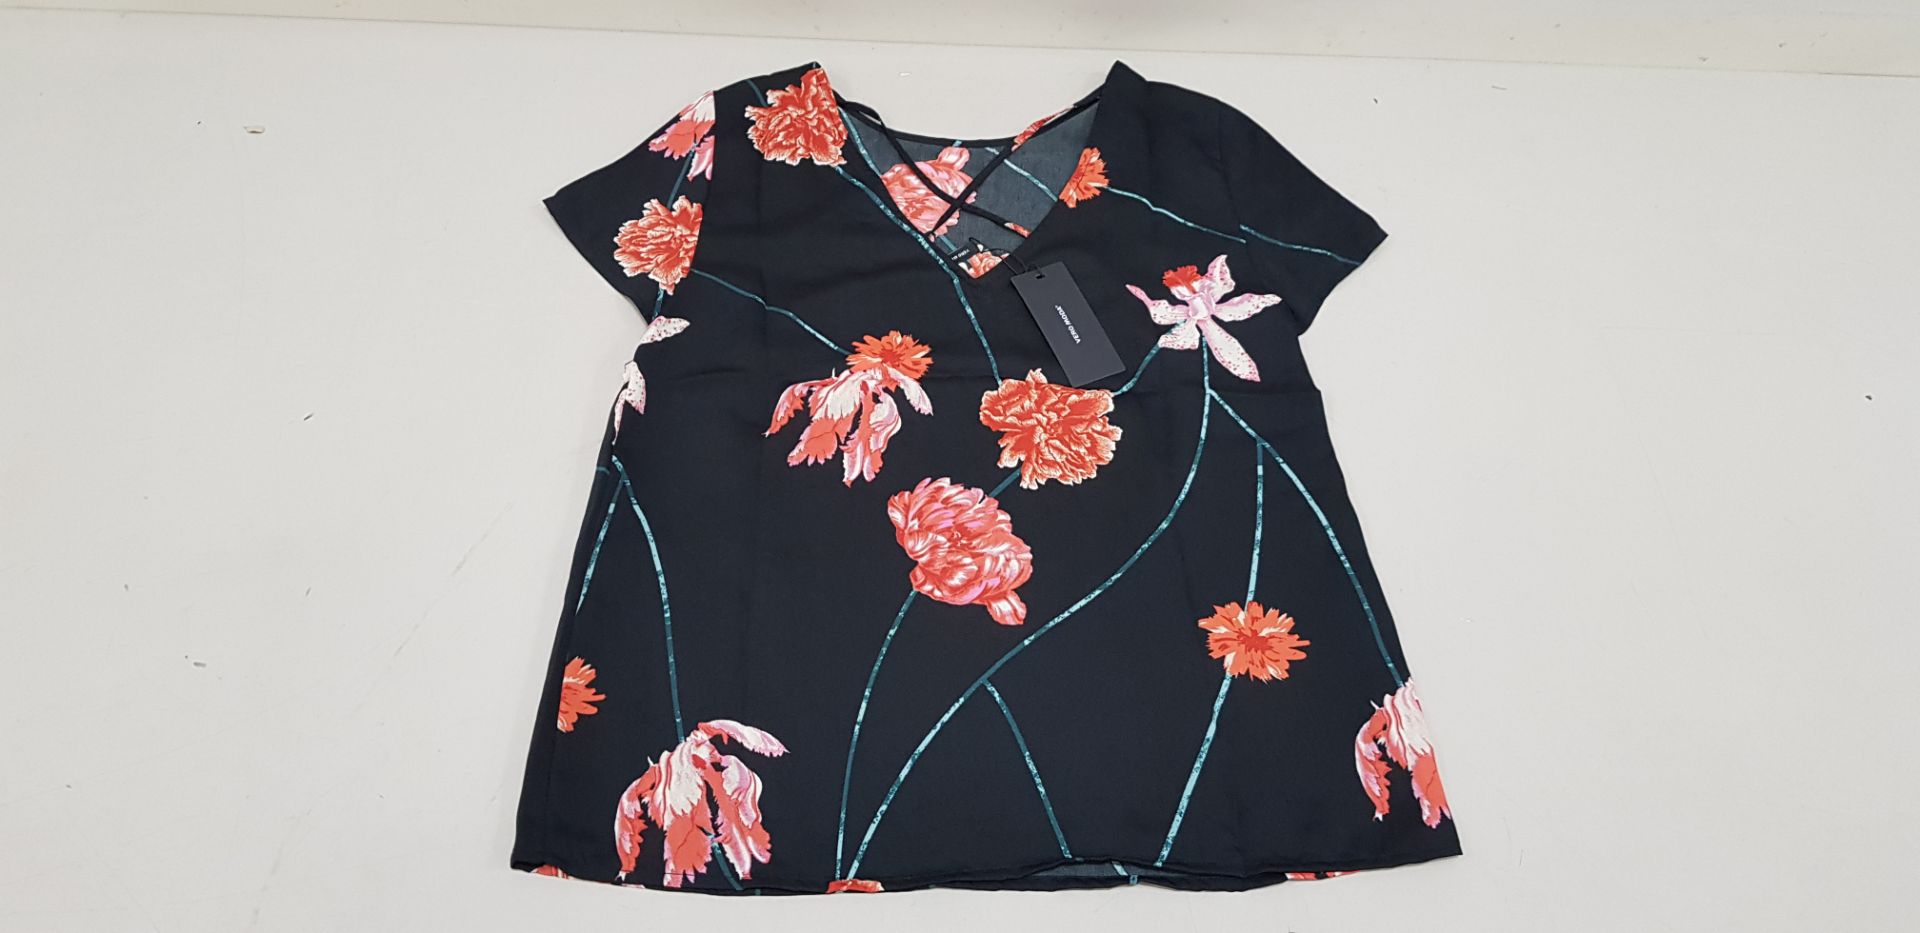 30 X BRAND NEW VERO MODA TOPS IN BLACK AND ROSE PATTEREN WITH SHOULDER STRINGS ALL IN VARIOUS